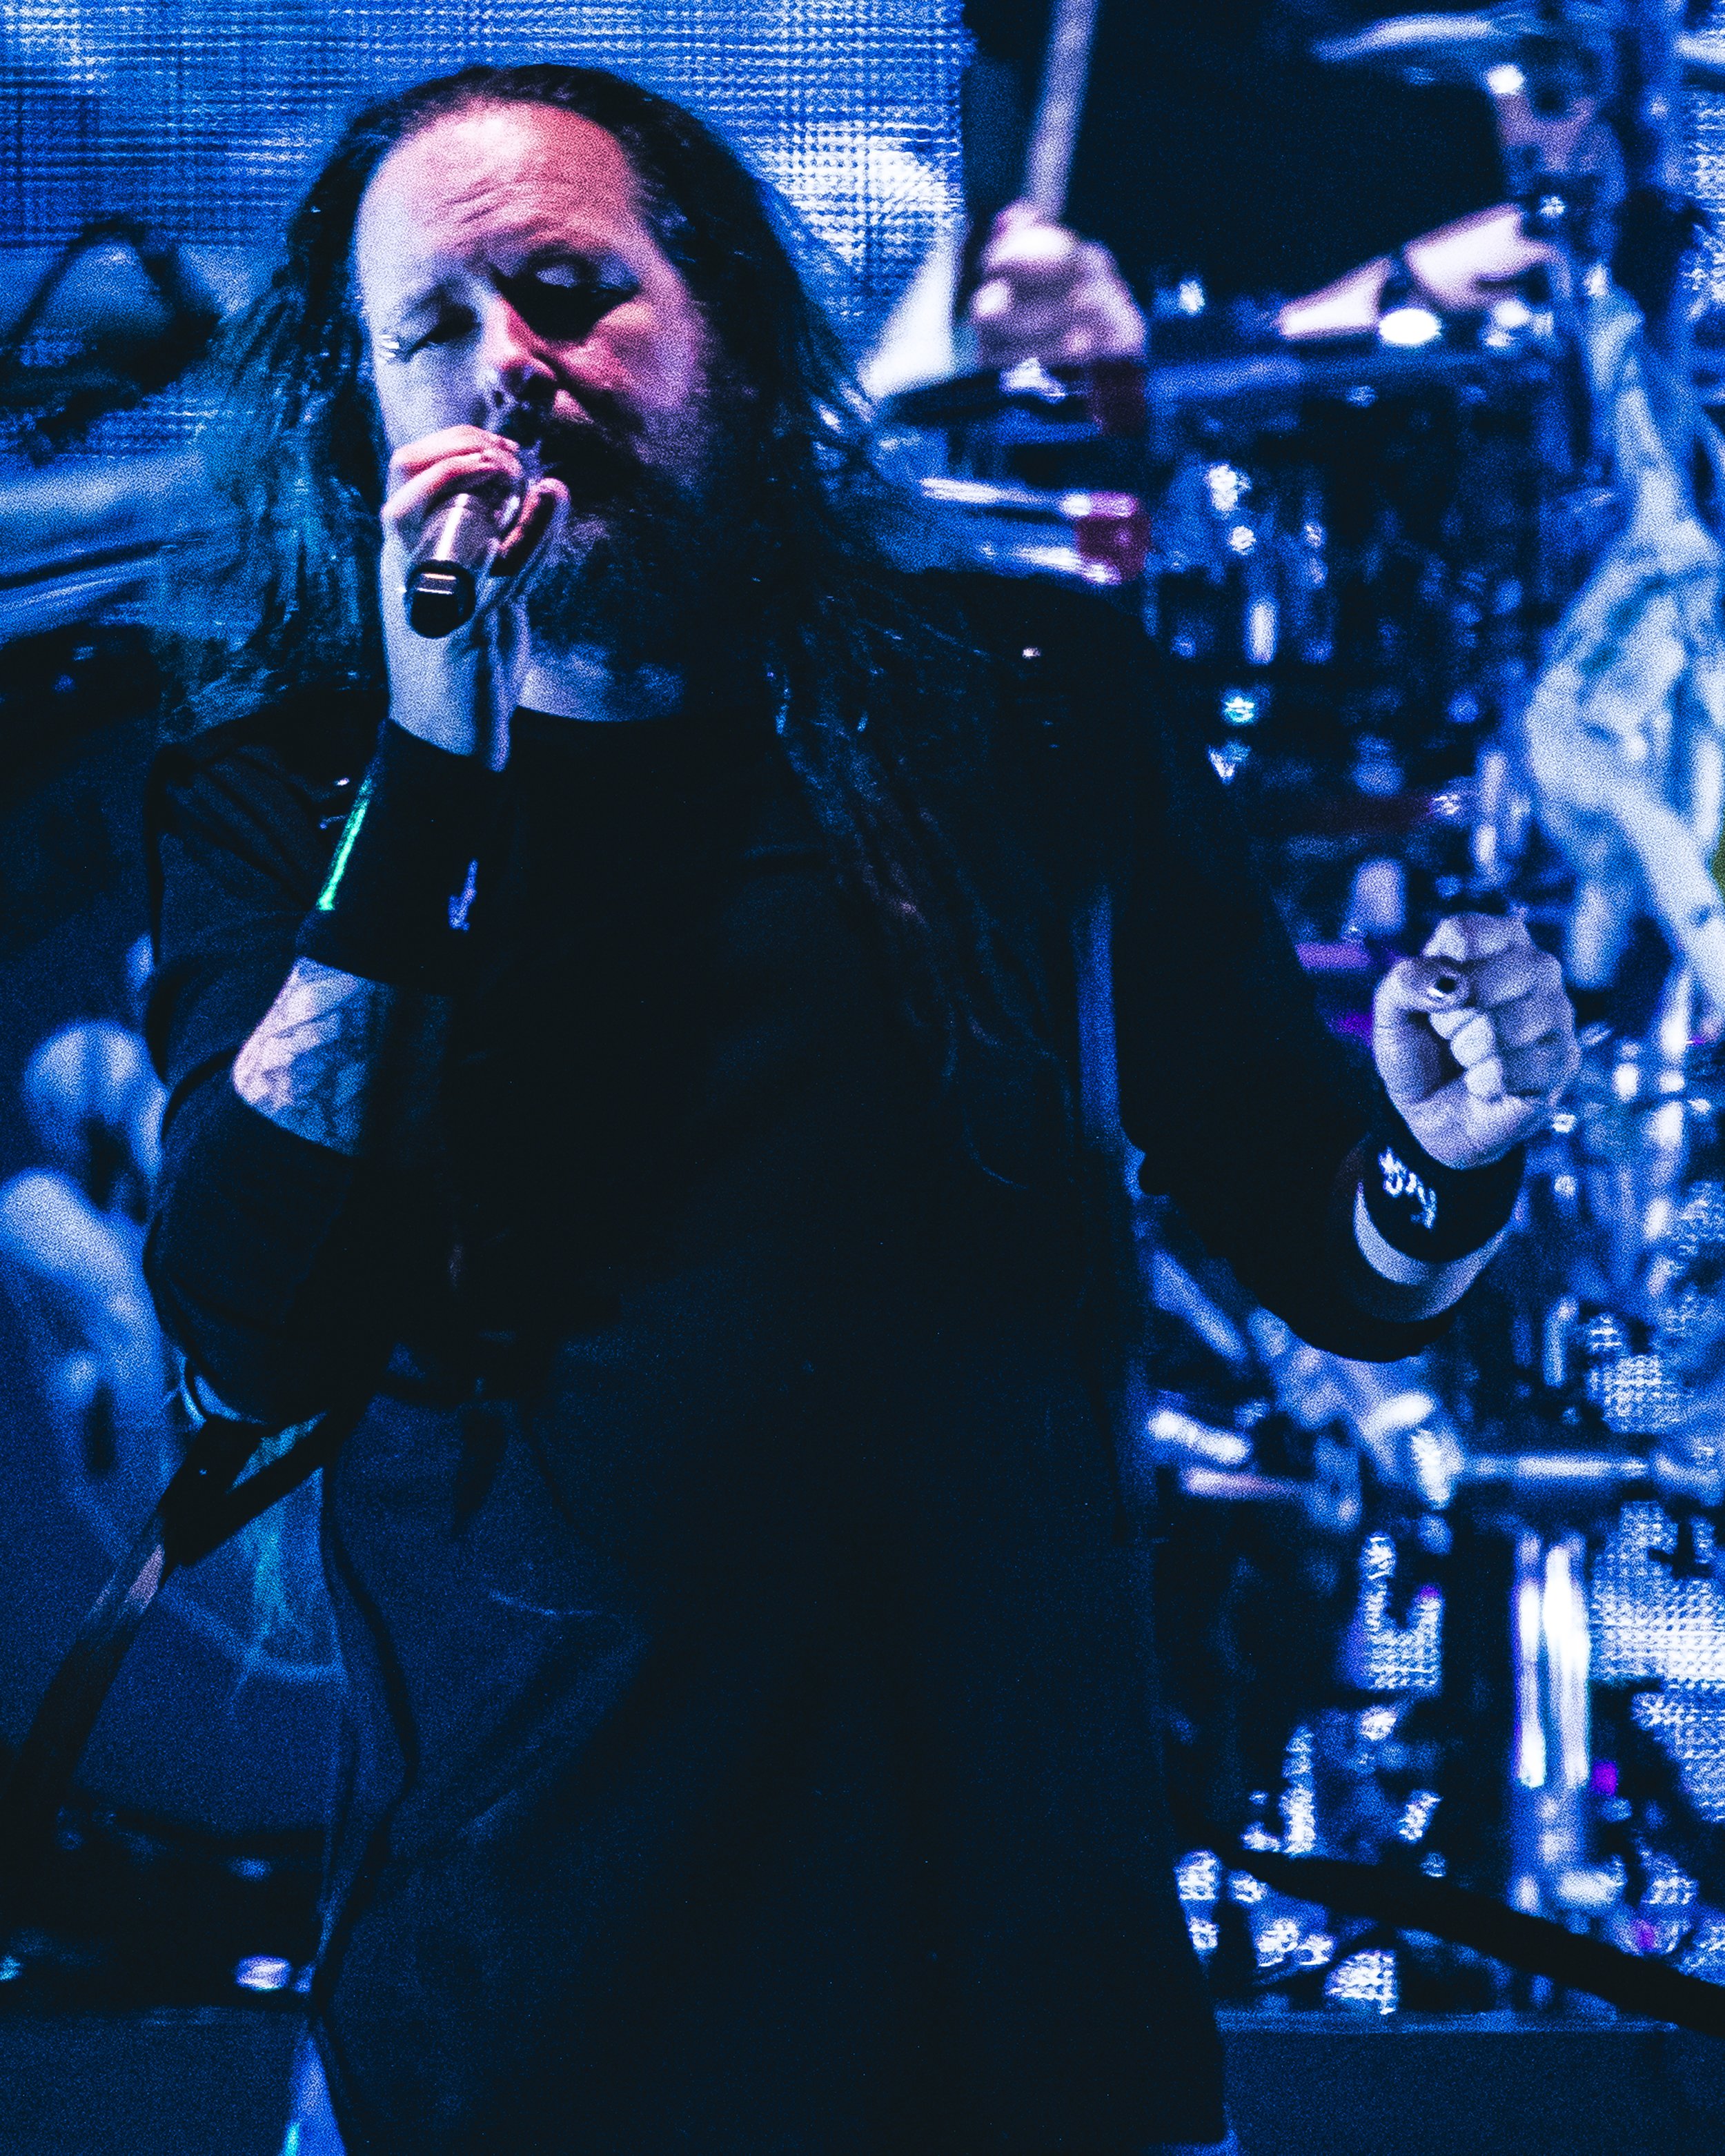 KORN - 2022 NORTH AMERICAN TOUR - Ball Arena - Denver, Colorado - Tuesday, August 16, 2022 - PHOTO BY Mowgli Miles of Interracial Friends - PHOTO BY Mowgli Miles of Interracial Friends-117.JPG